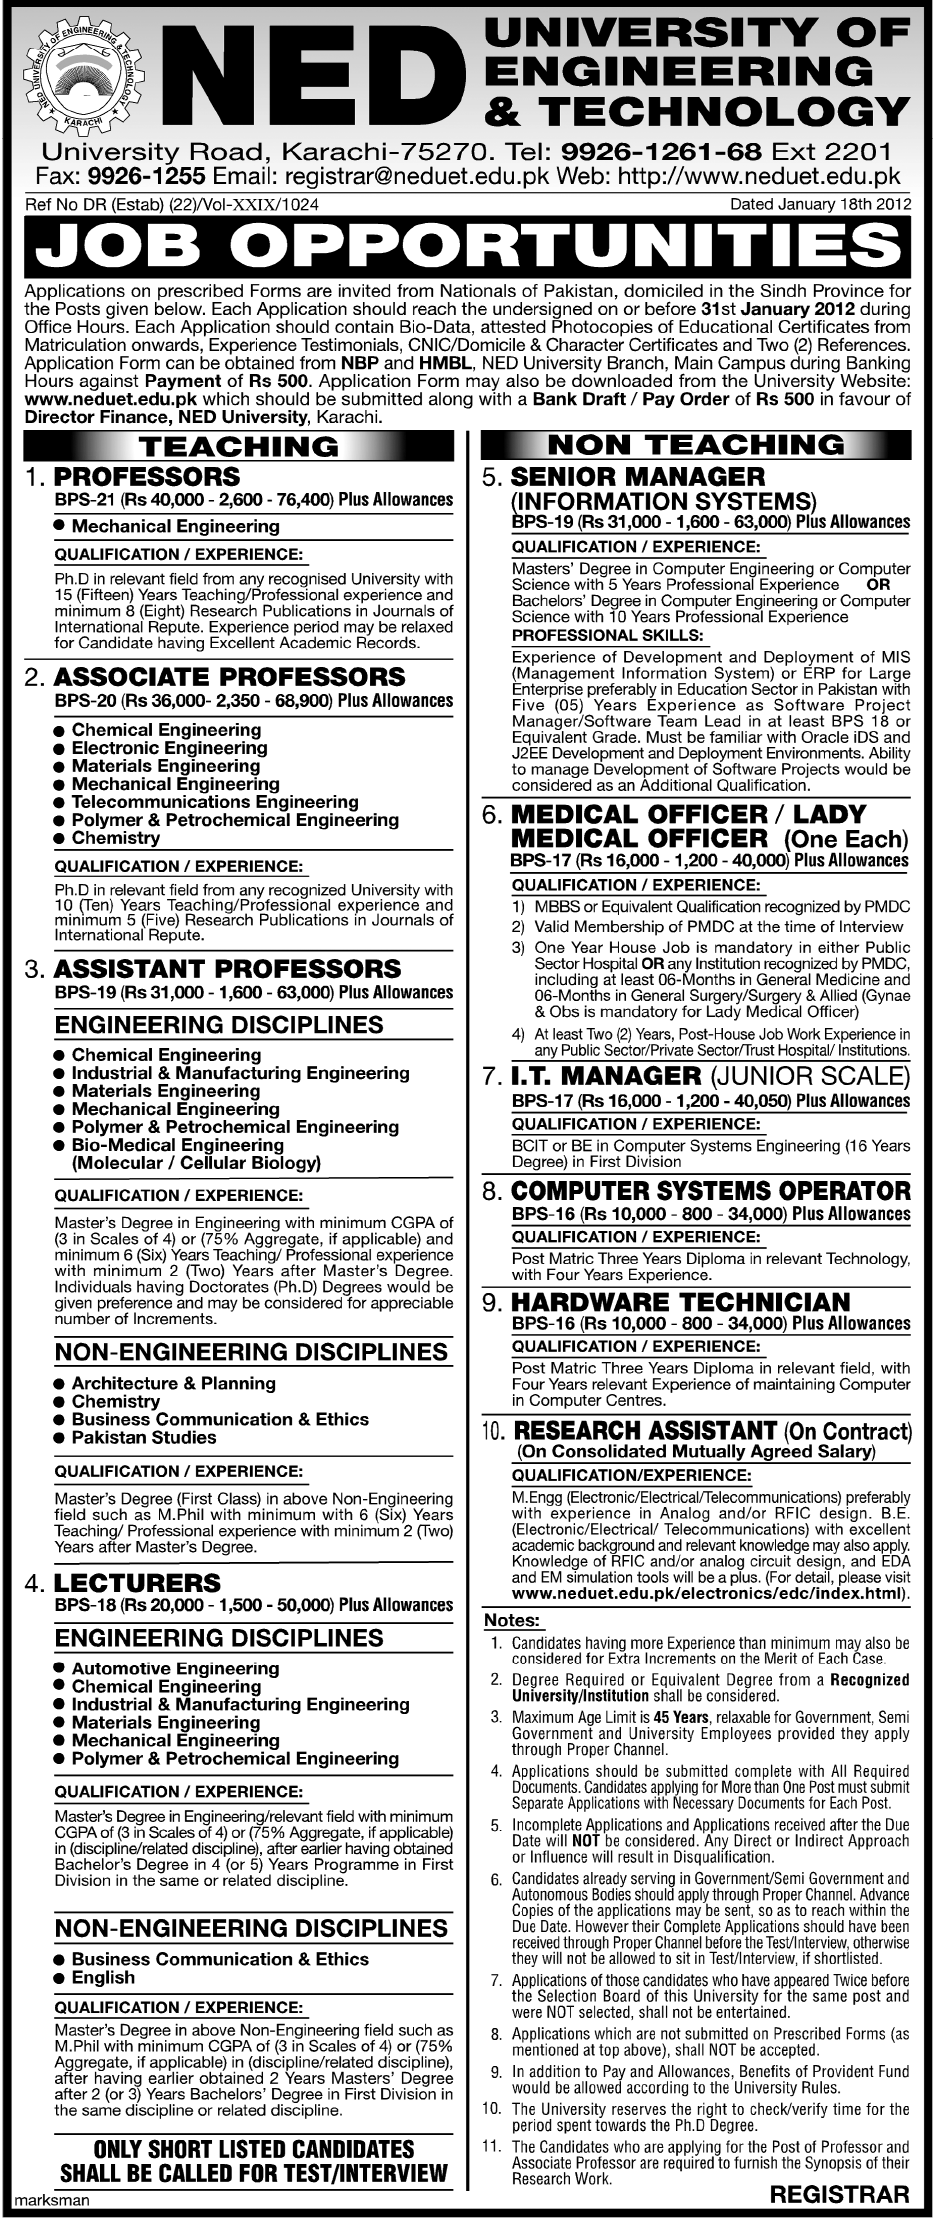 NED University of Engineering & Technology Jobs Opportunity